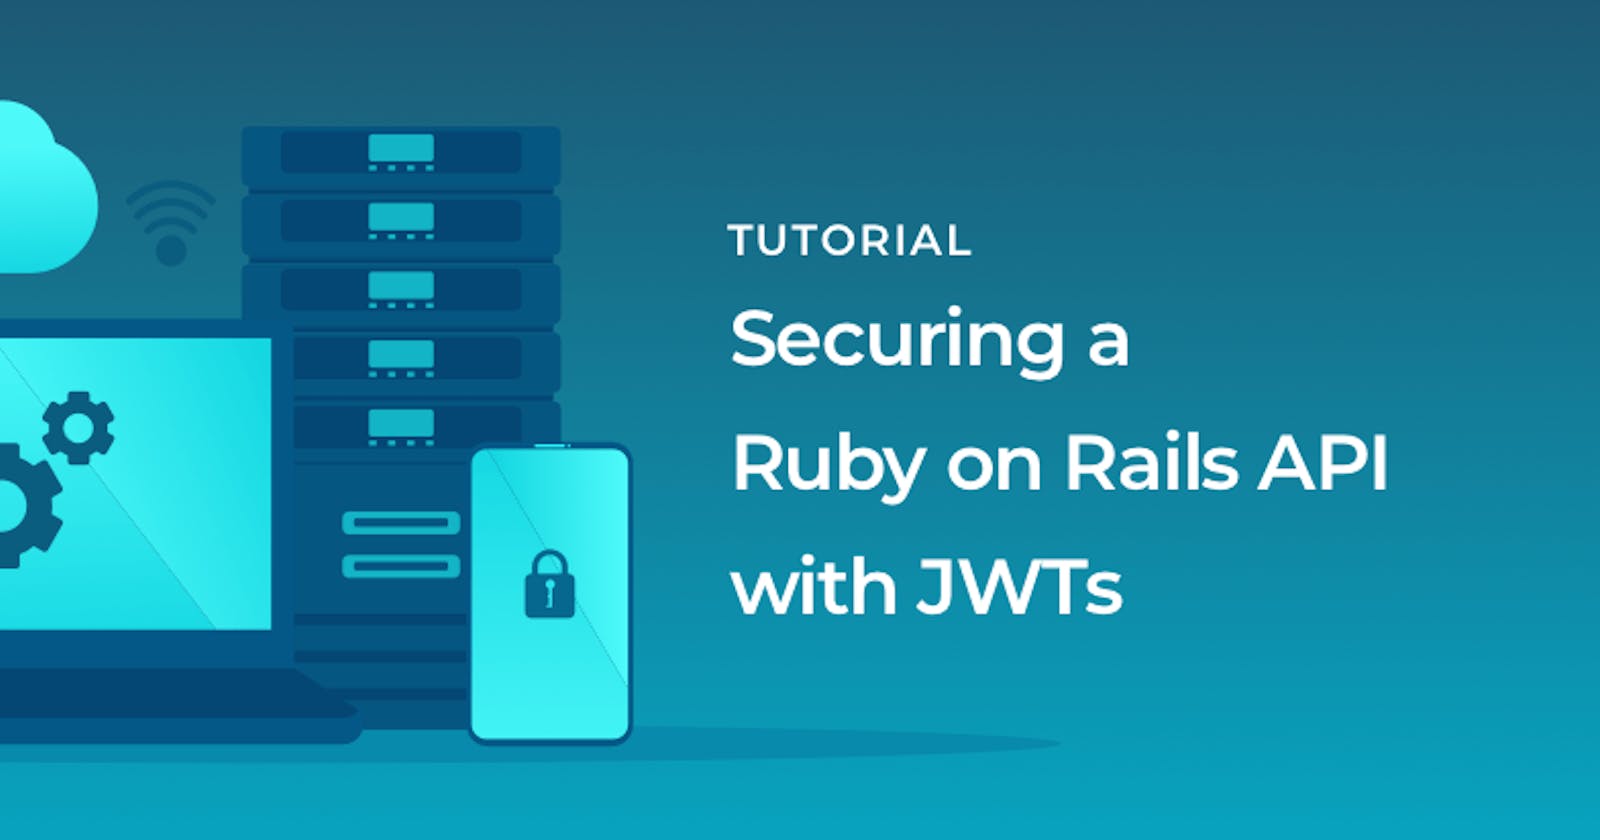 Securing a Ruby on Rails API with JWTs